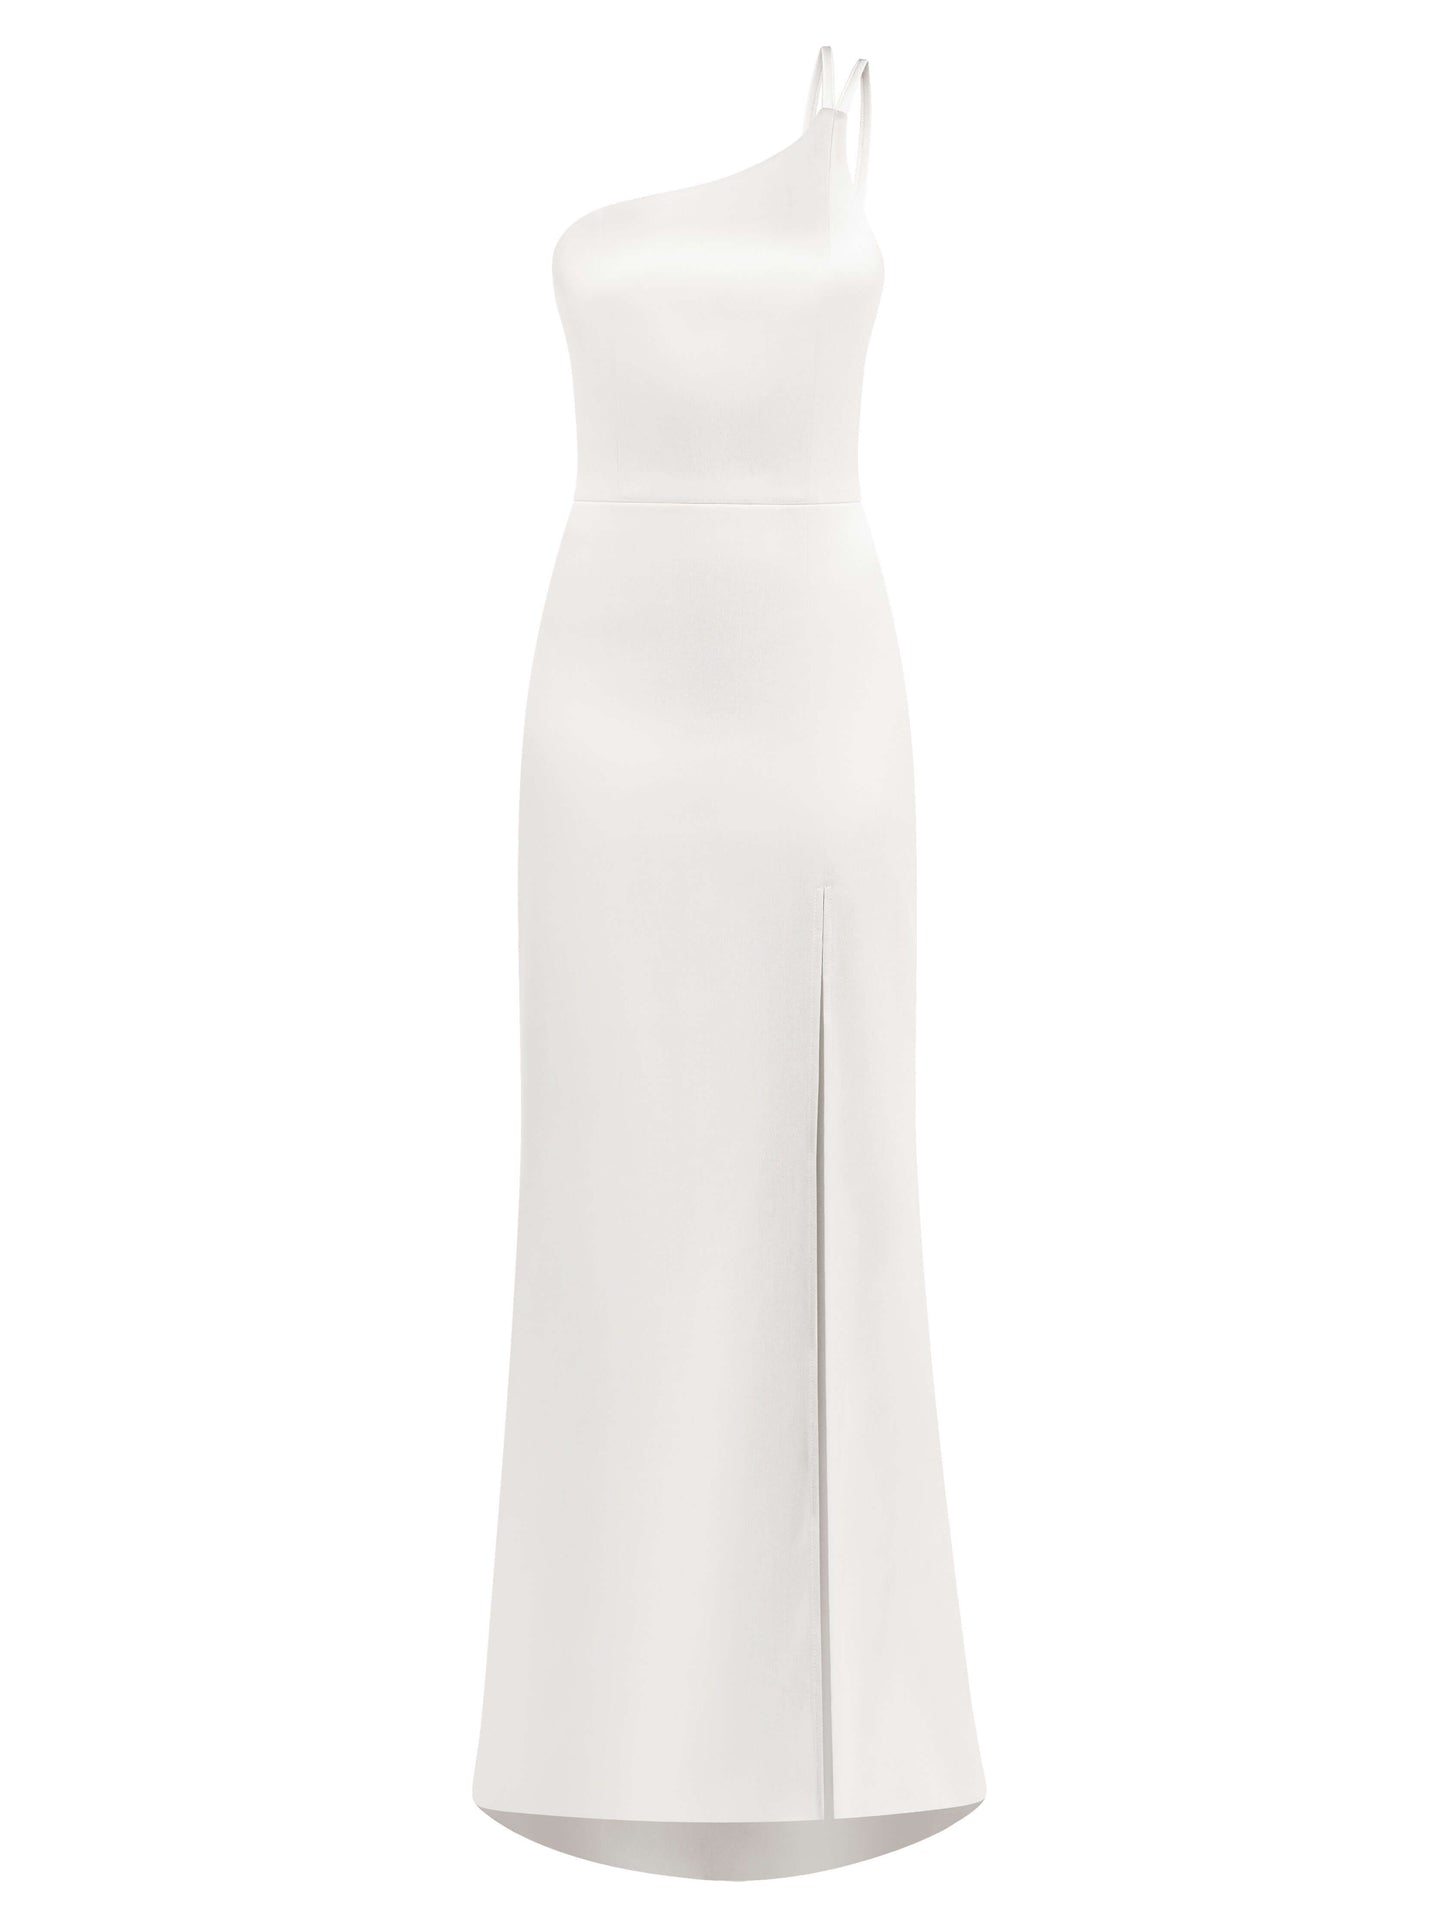 Goddess of Love Long Gown - Pearl White by Tia Dorraine Women's Luxury Fashion Designer Clothing Brand